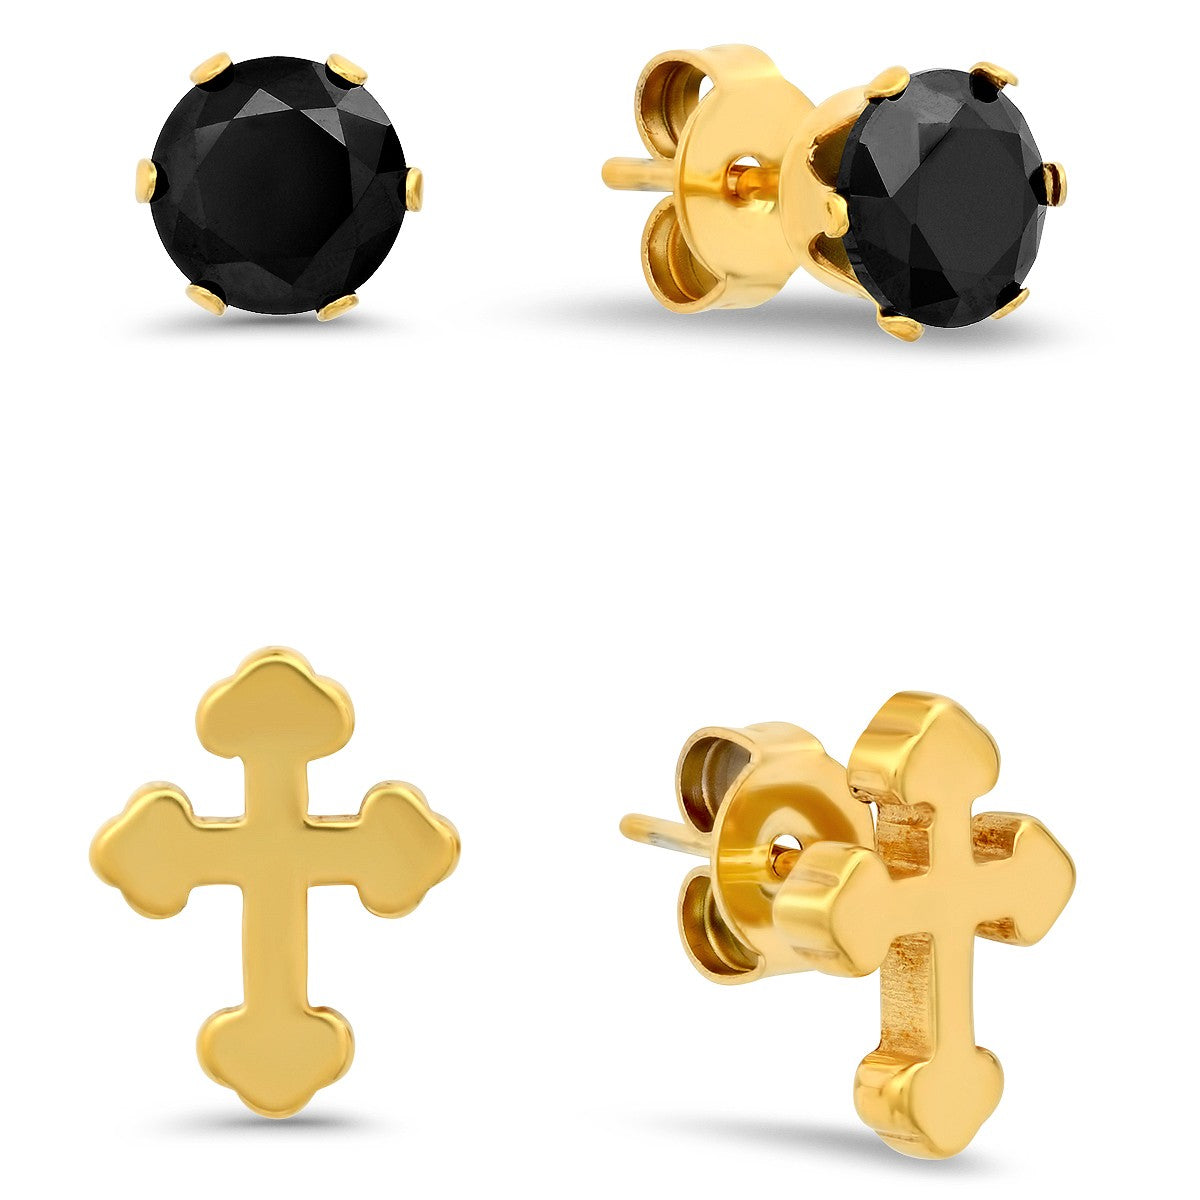 title:SteelTime Women's Stainless Steel Black Simulated Diamond Studs With Coss Studs Set;color:Gold